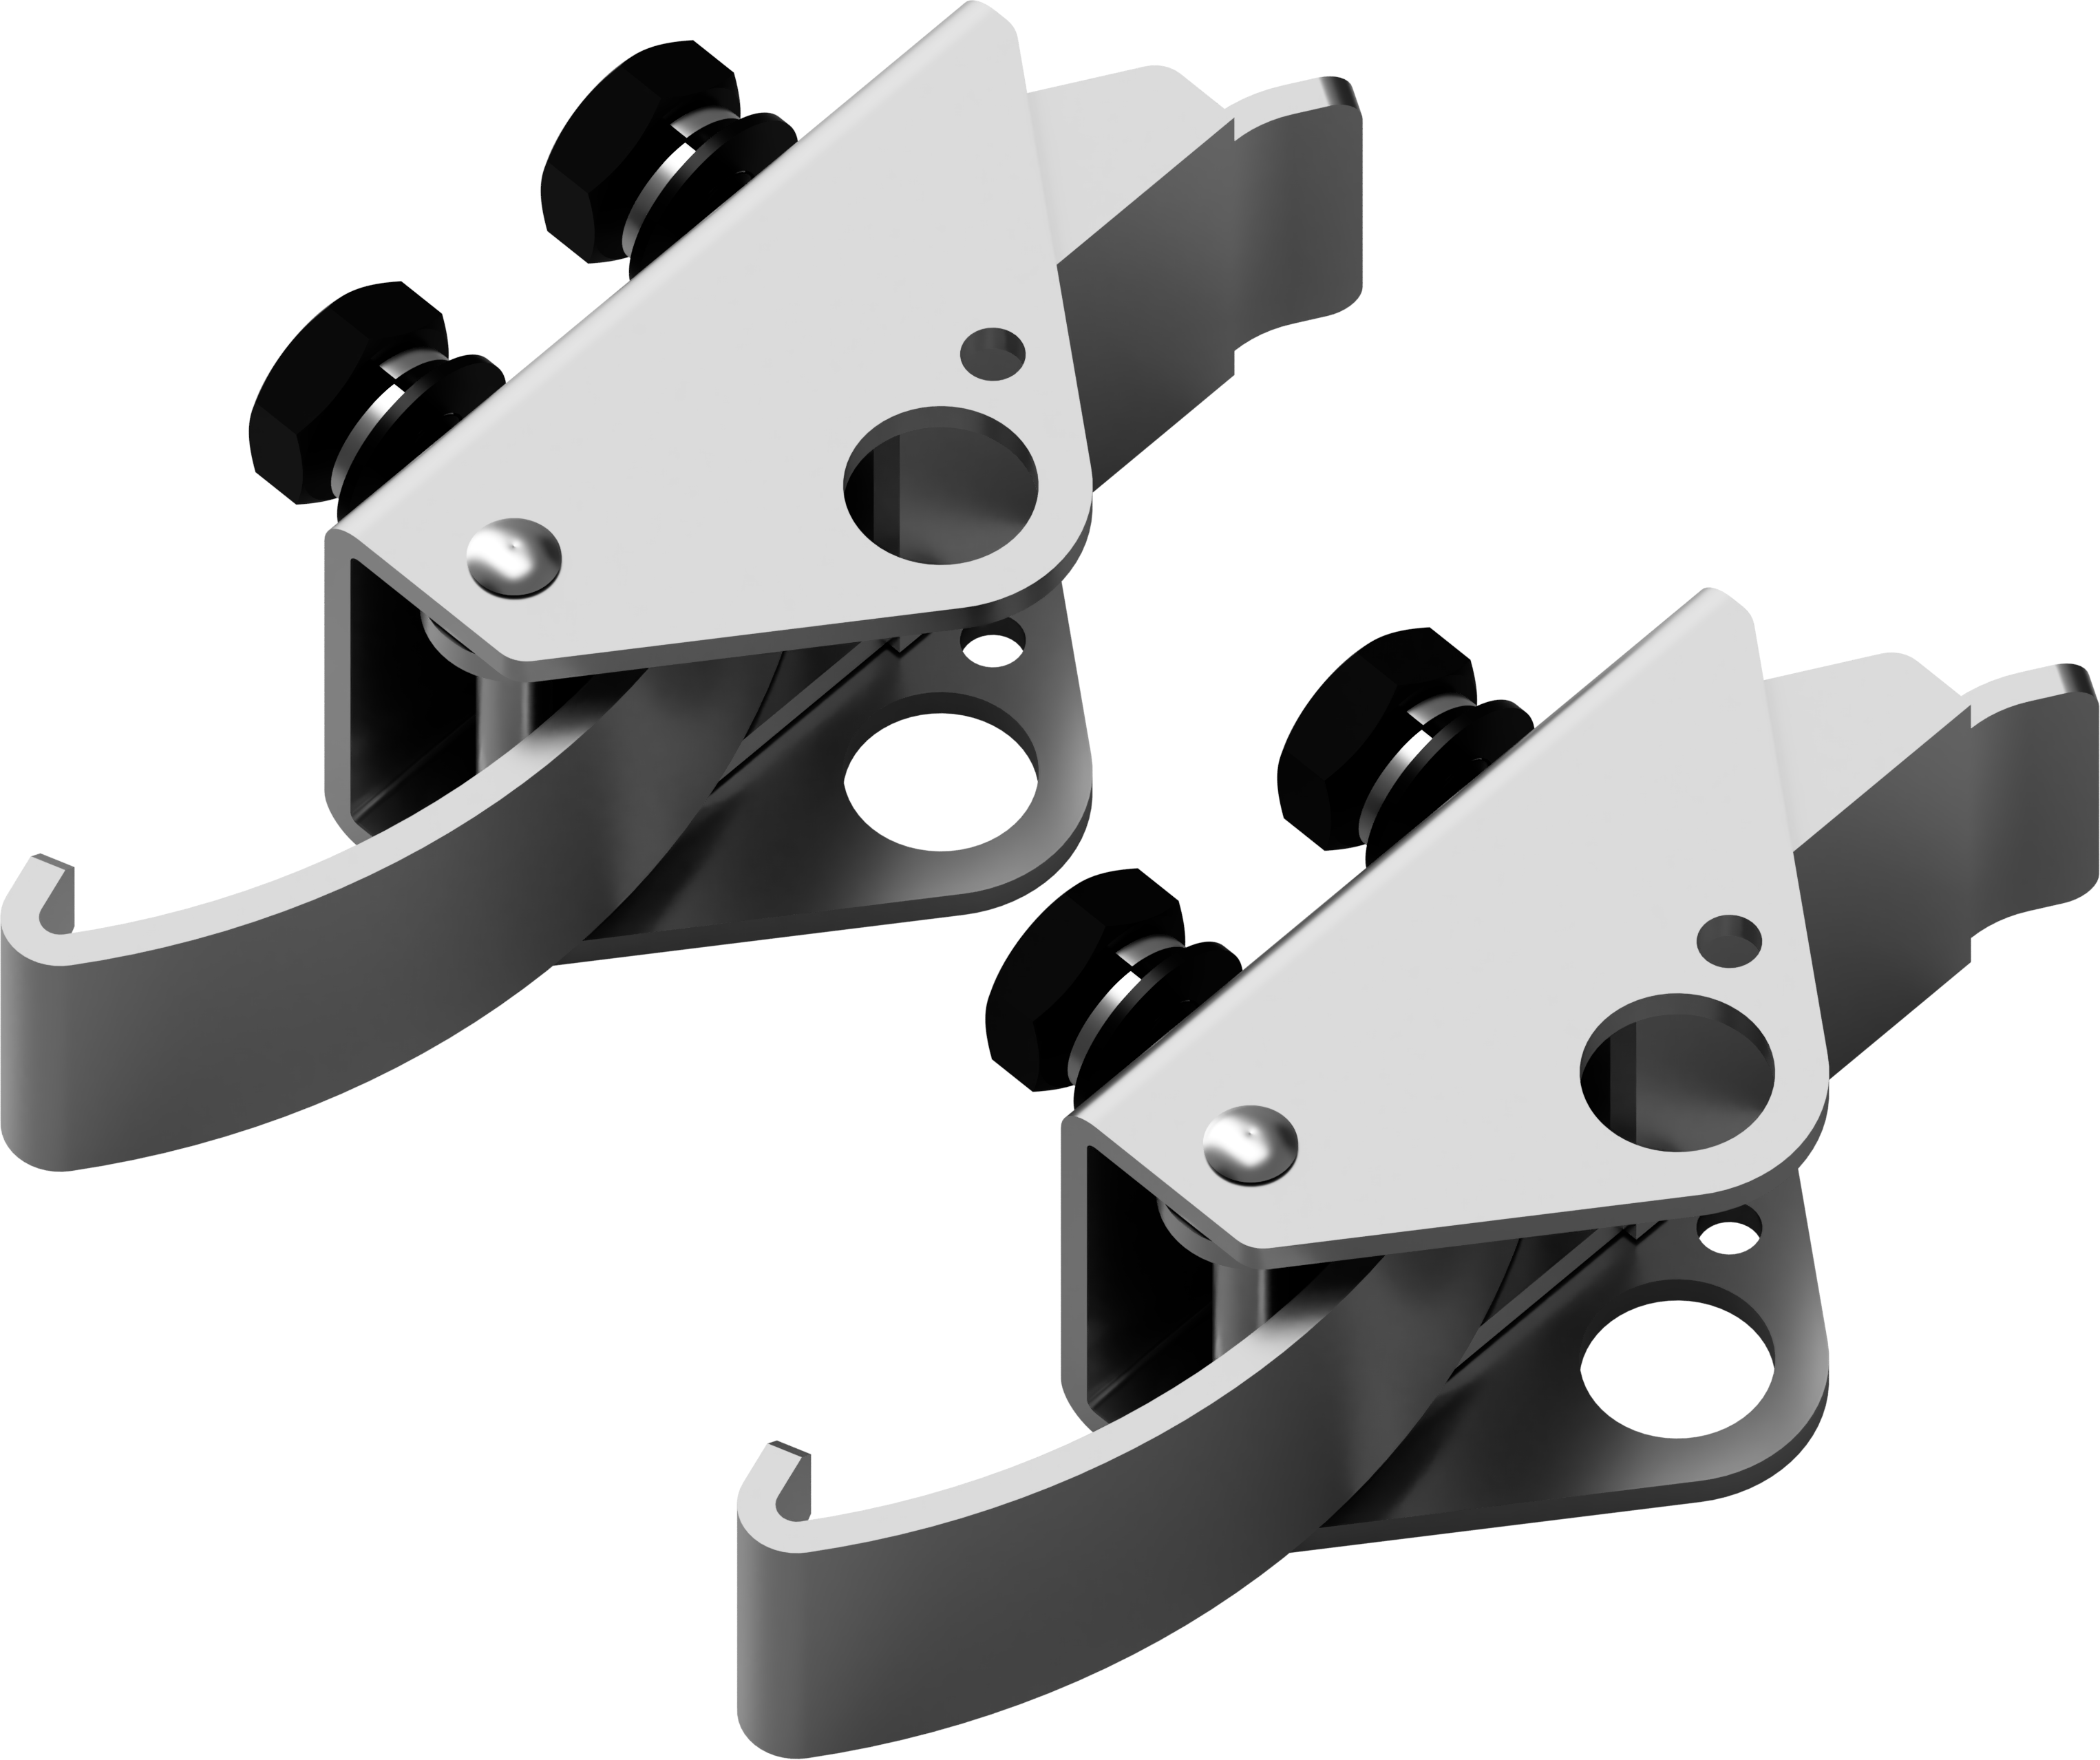 X Stream Designs - X-RSSL - Replacement Stainless Steel Latches Kit - Includes 2x Stainless Steel Latches & Associated Stainless Steel Hardware to Install the Latches